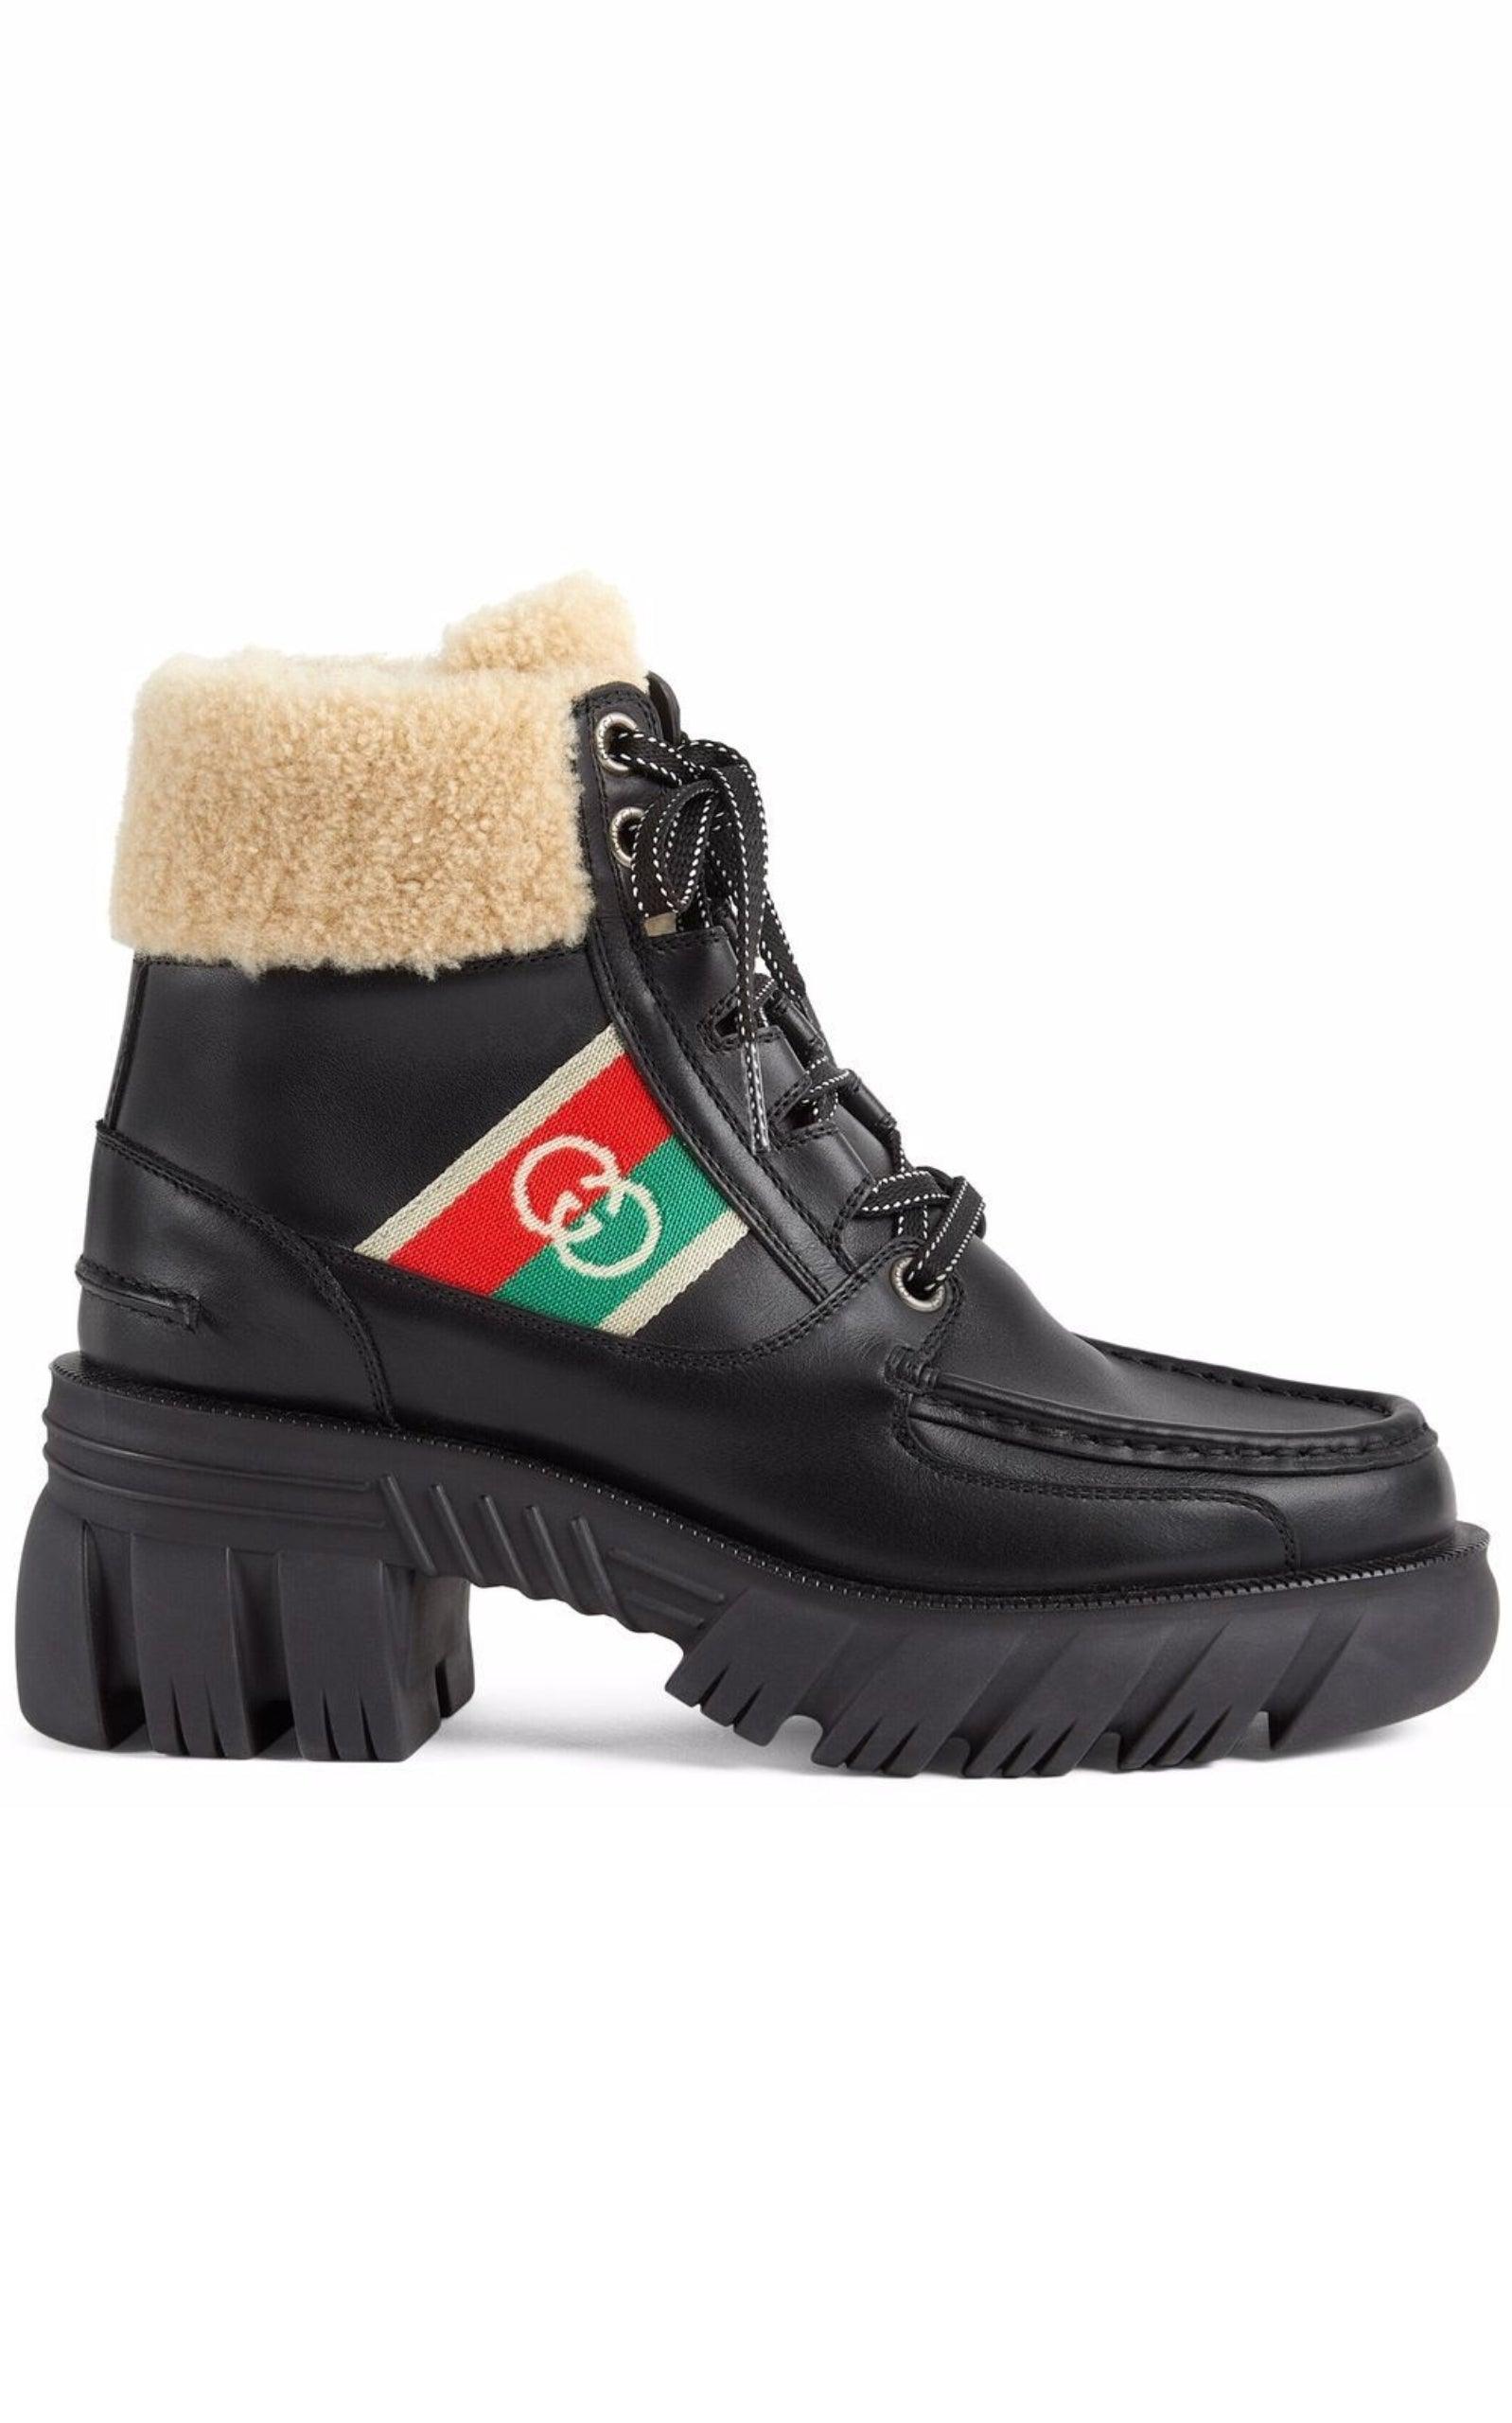 The North Face x Gucci boots 